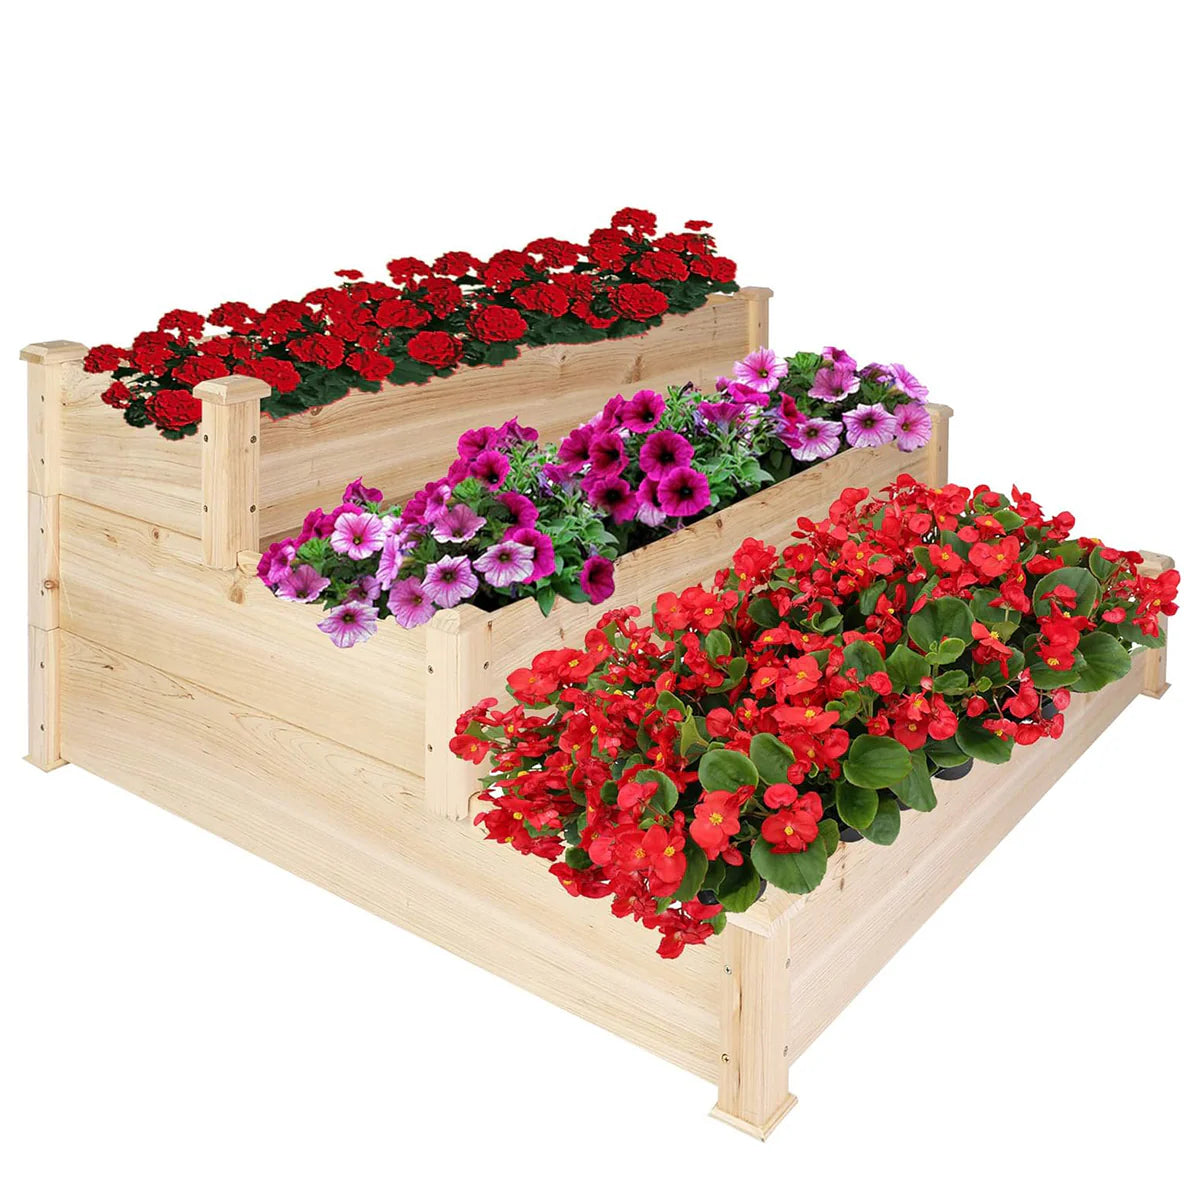 3 Tier Raised Garden Bed Outdoor Wooden Elevated Planter Box Solid Fir Wood for Planting Flower Vegetable Fruit | karmasfar.us